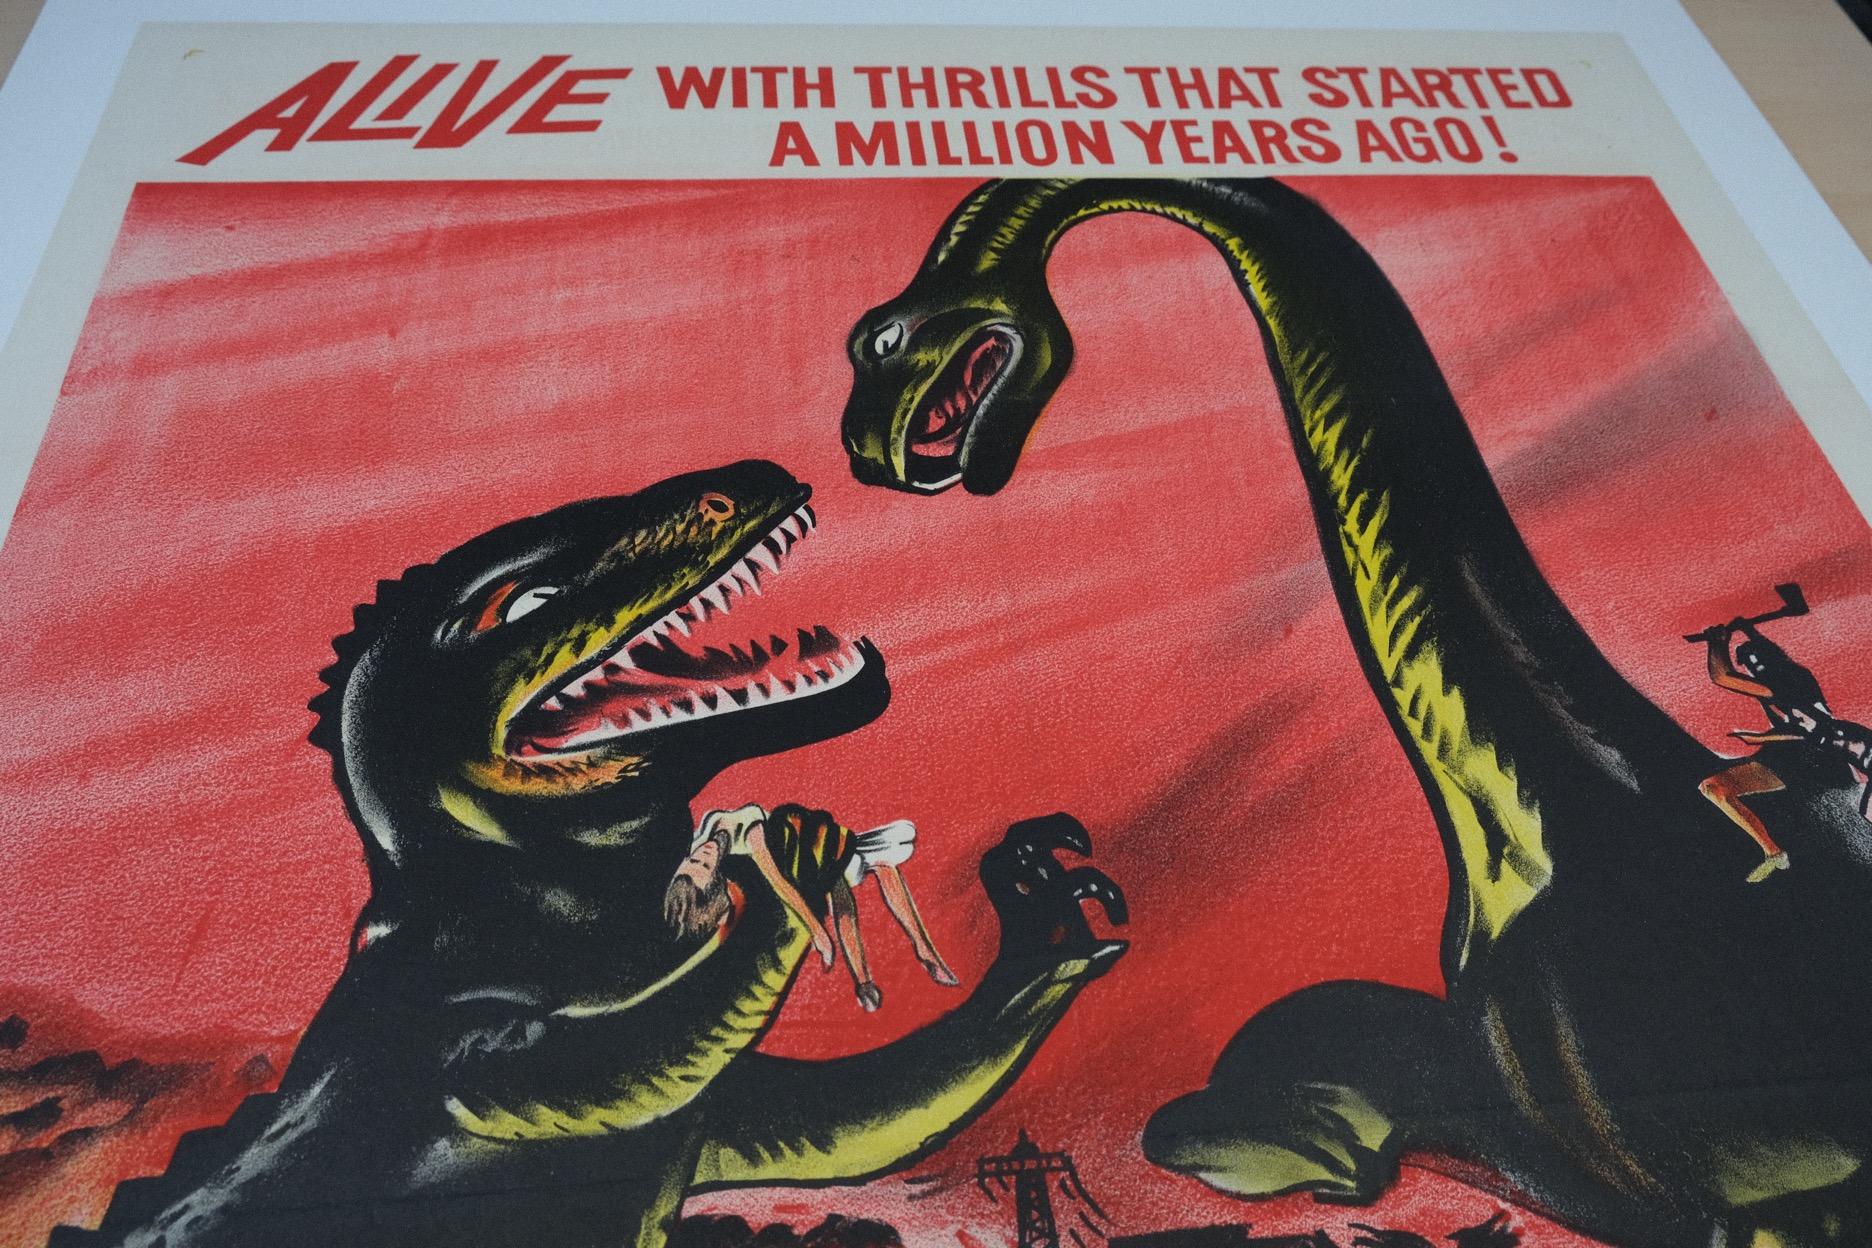 Size: One-Sheet

Condition: Very Fine

Dimensions: 1150mm x 780mm (inc. Linen Border)

Type: Original Lithographic Print - Linen Backed

Year: 1960

Details: A rare original poster for the classic 1960 Sci-Fi film ‘Dinosaurus!’. This poster is an